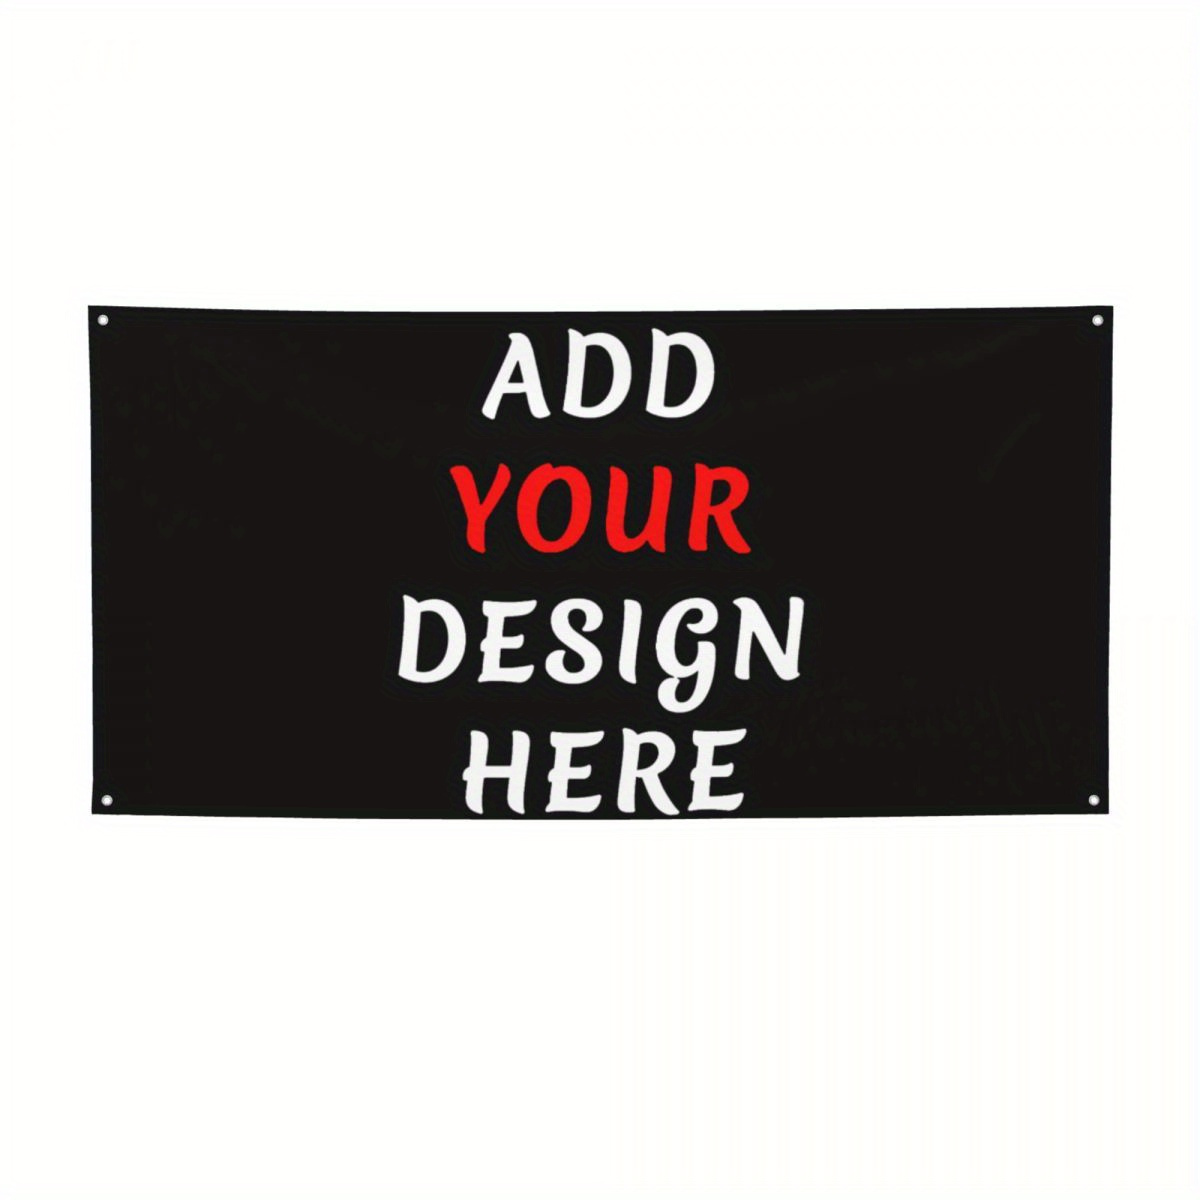 

Personalized Custom Banner For Indoor Or Outdoor Use - Perfect For Business Events, Birthday Parties, And Children's Room Decorations